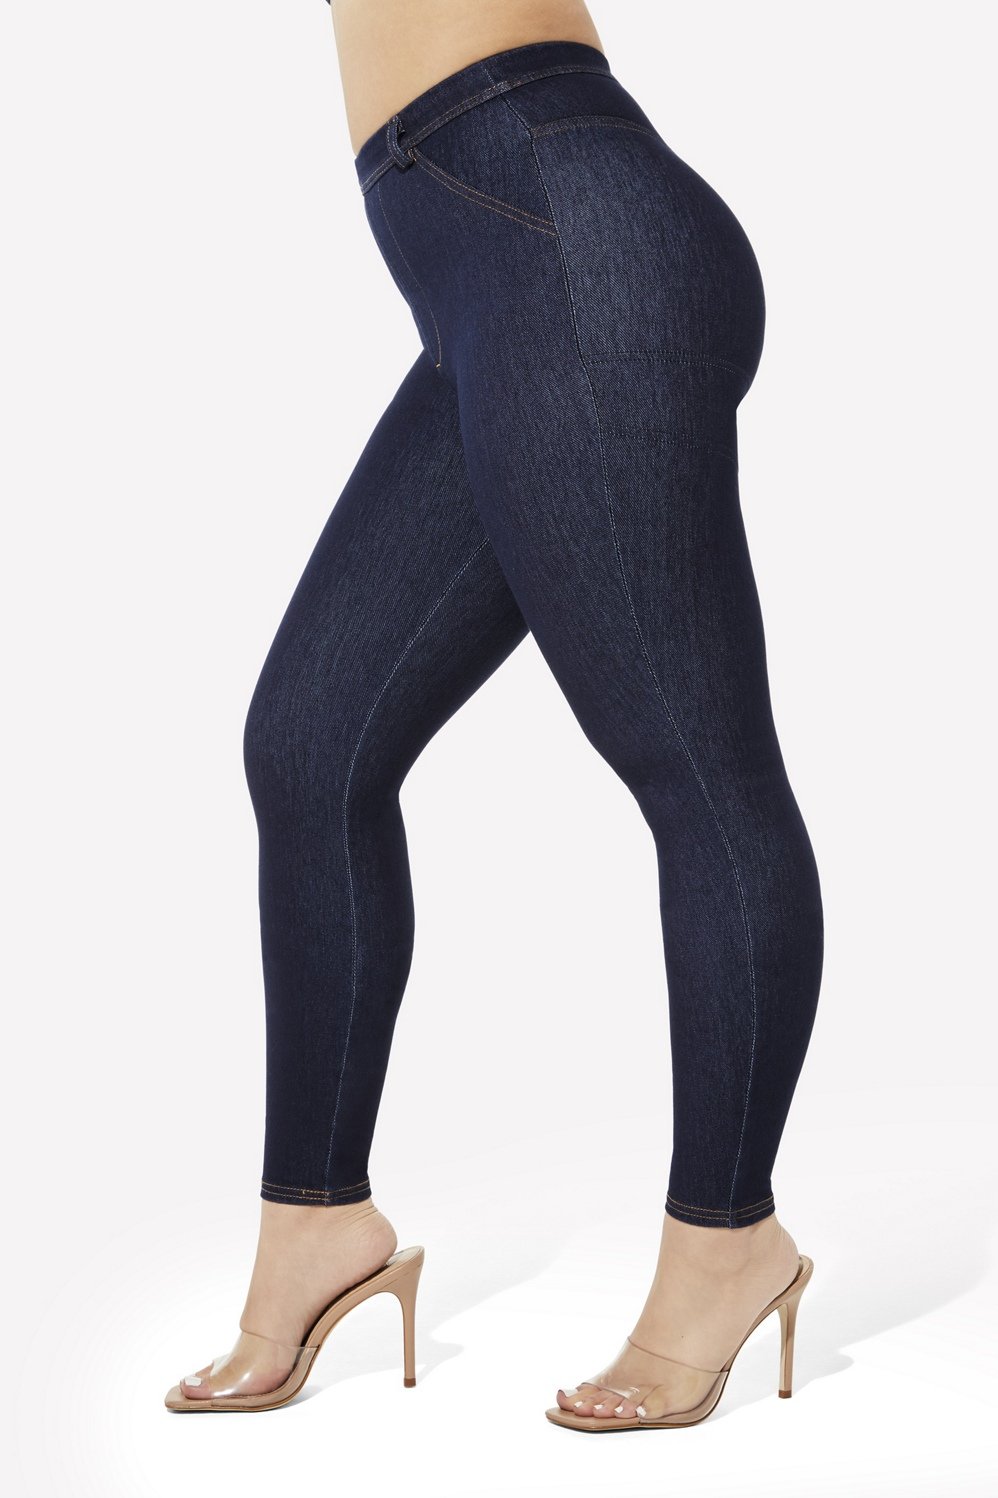 Slay the Denim Look with Comfort Lady. Our #DenimJeggings are